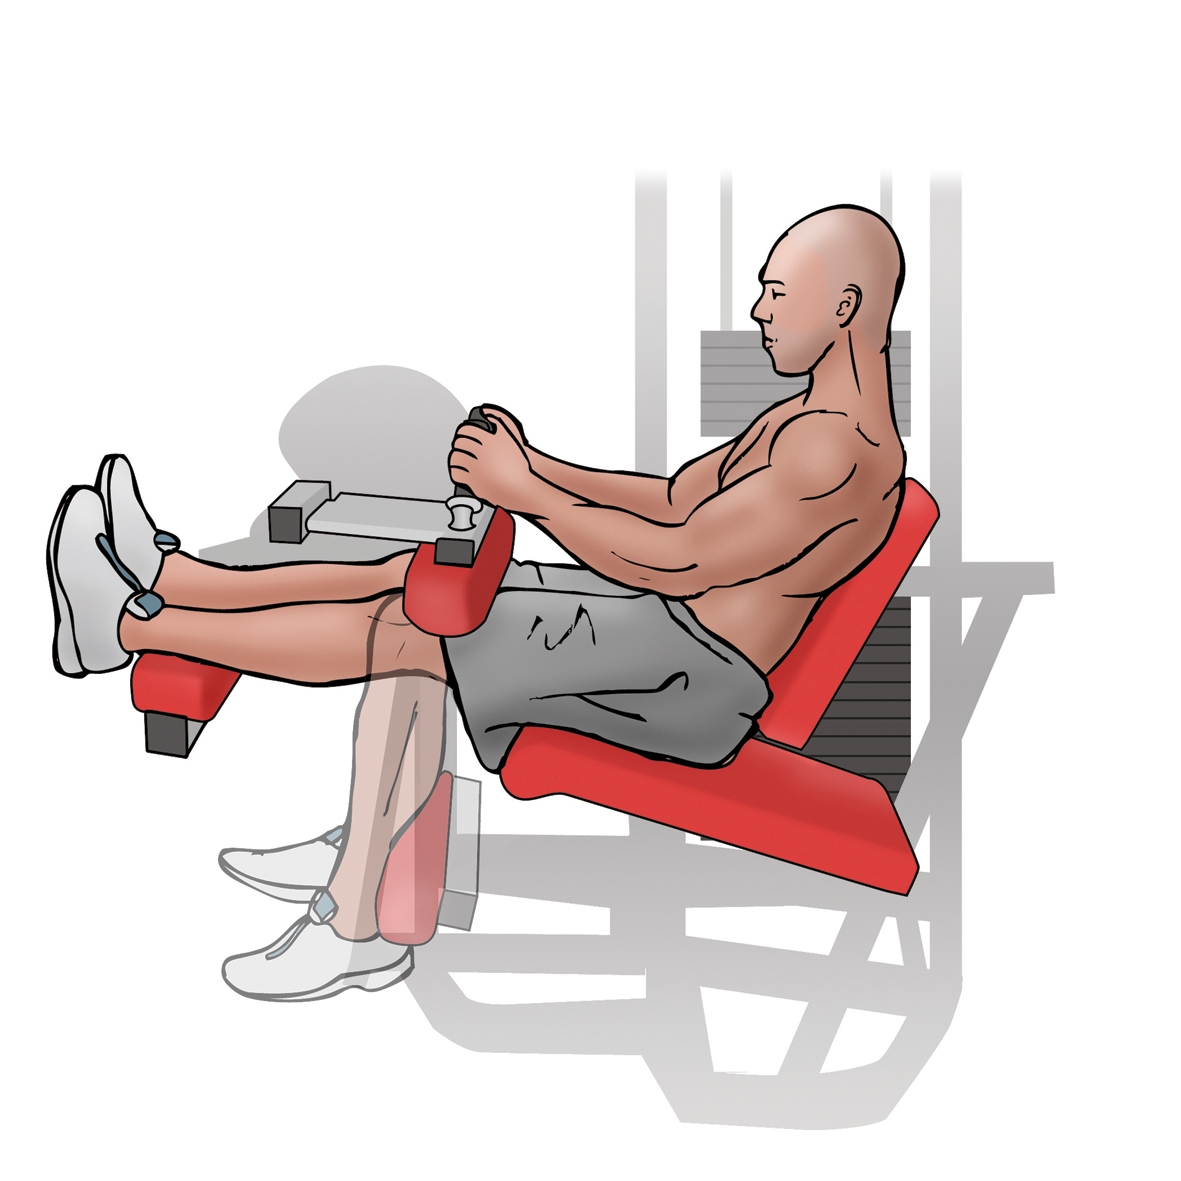 d) Seated hamstring curls